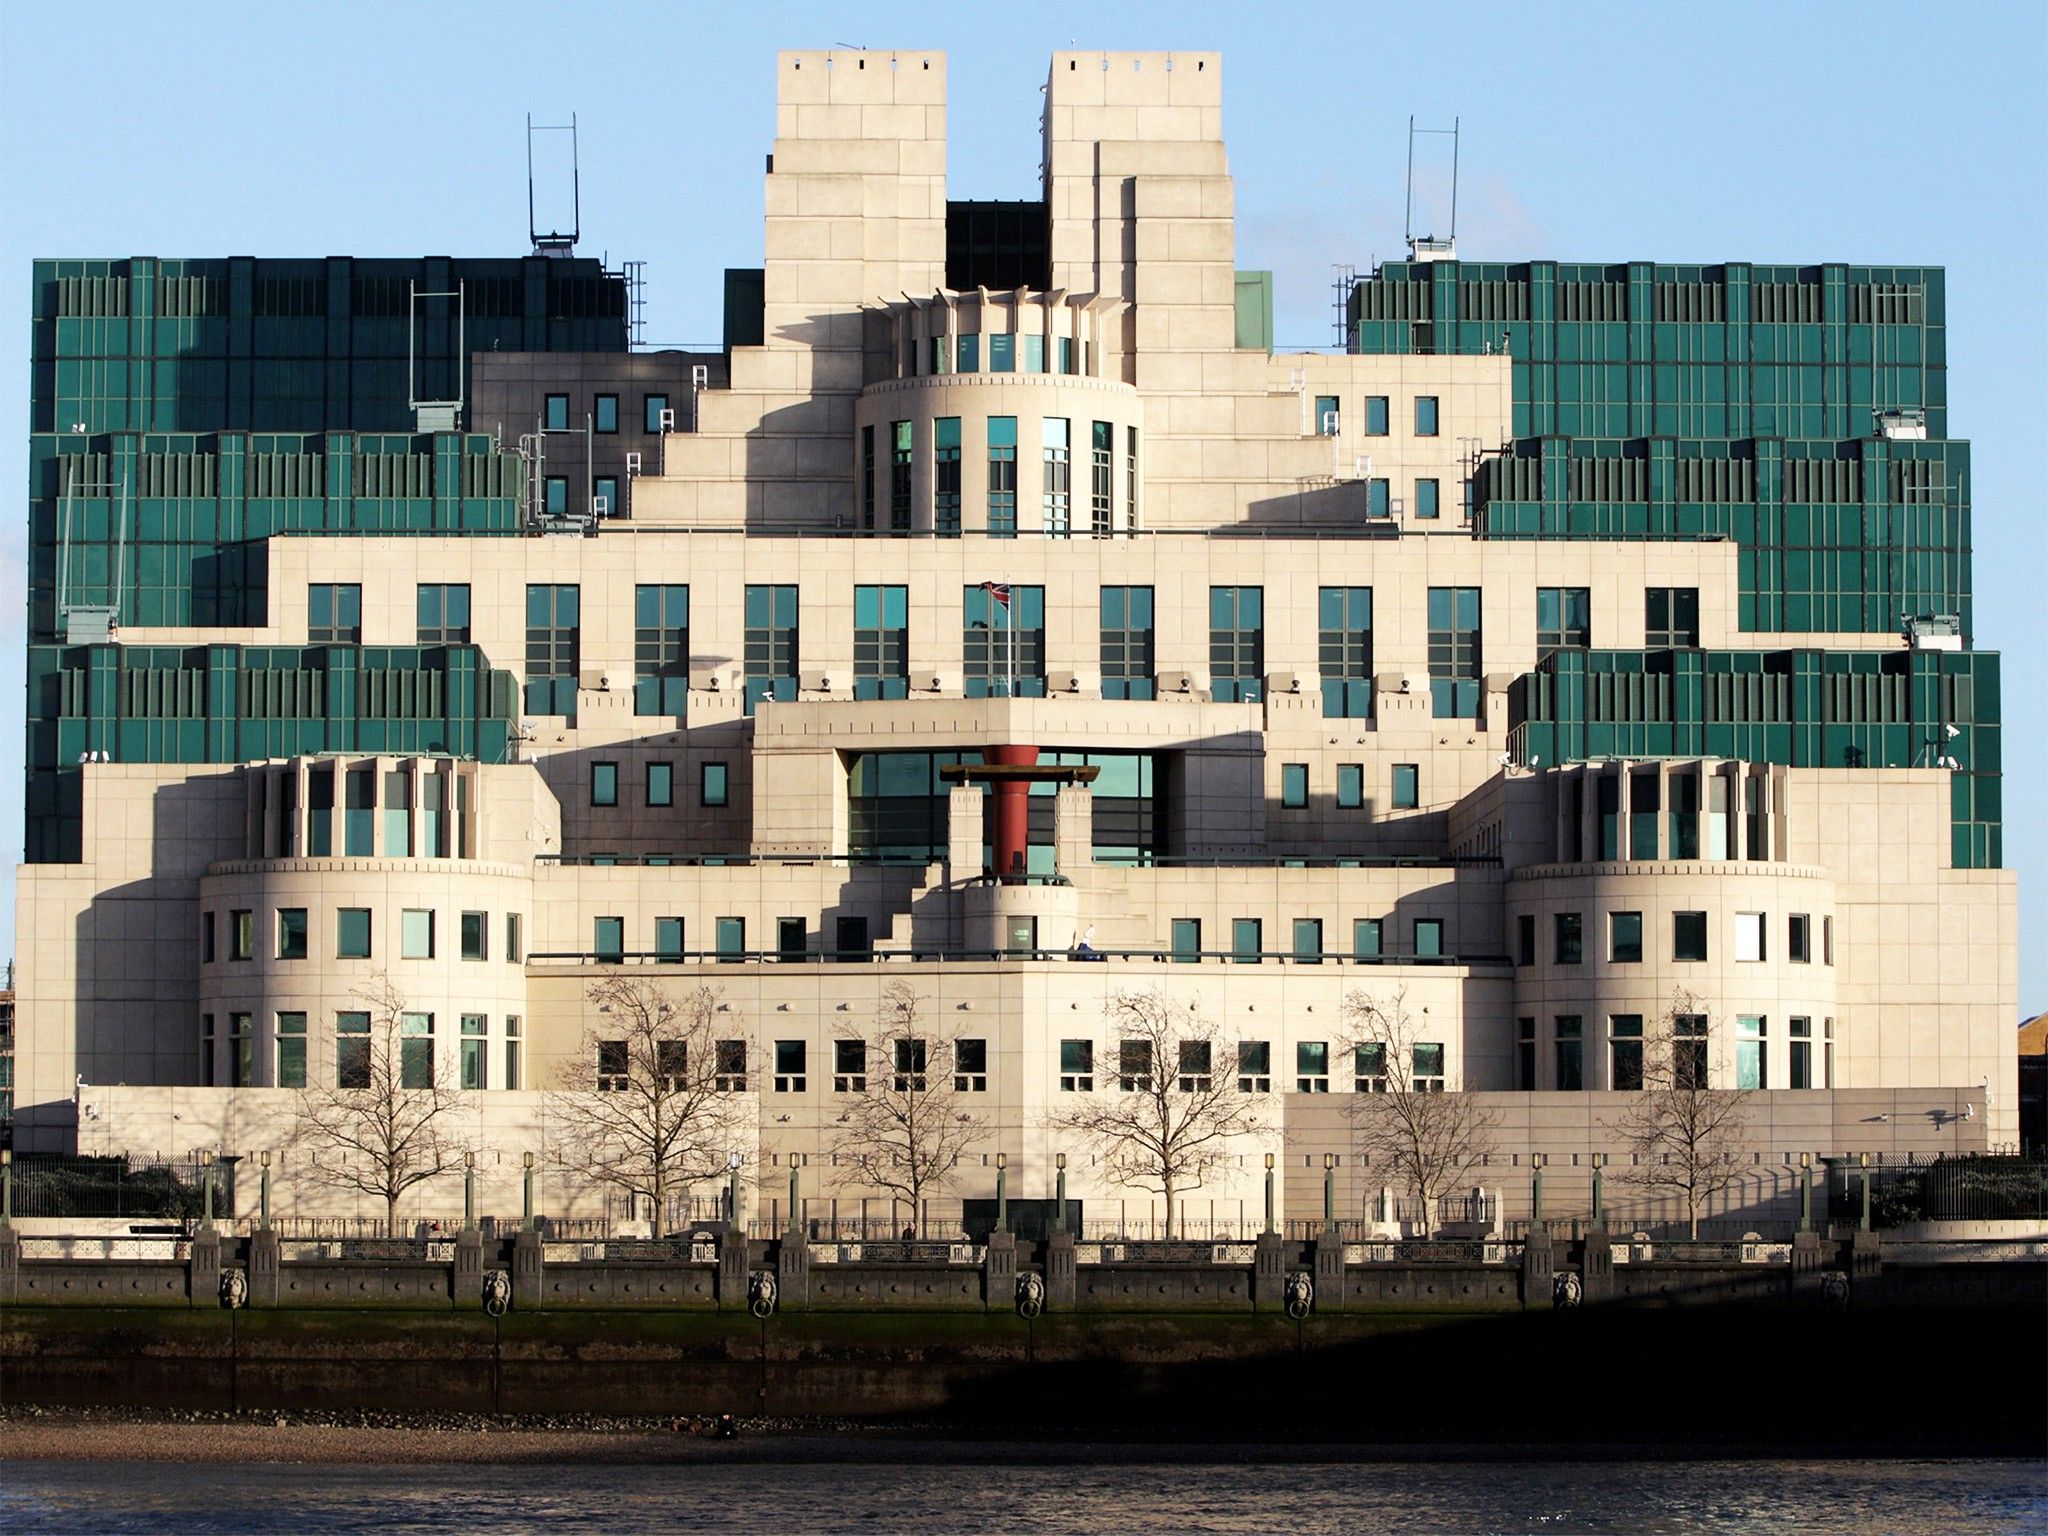 The man who brought jihad to Britain, did so thanks to MI6